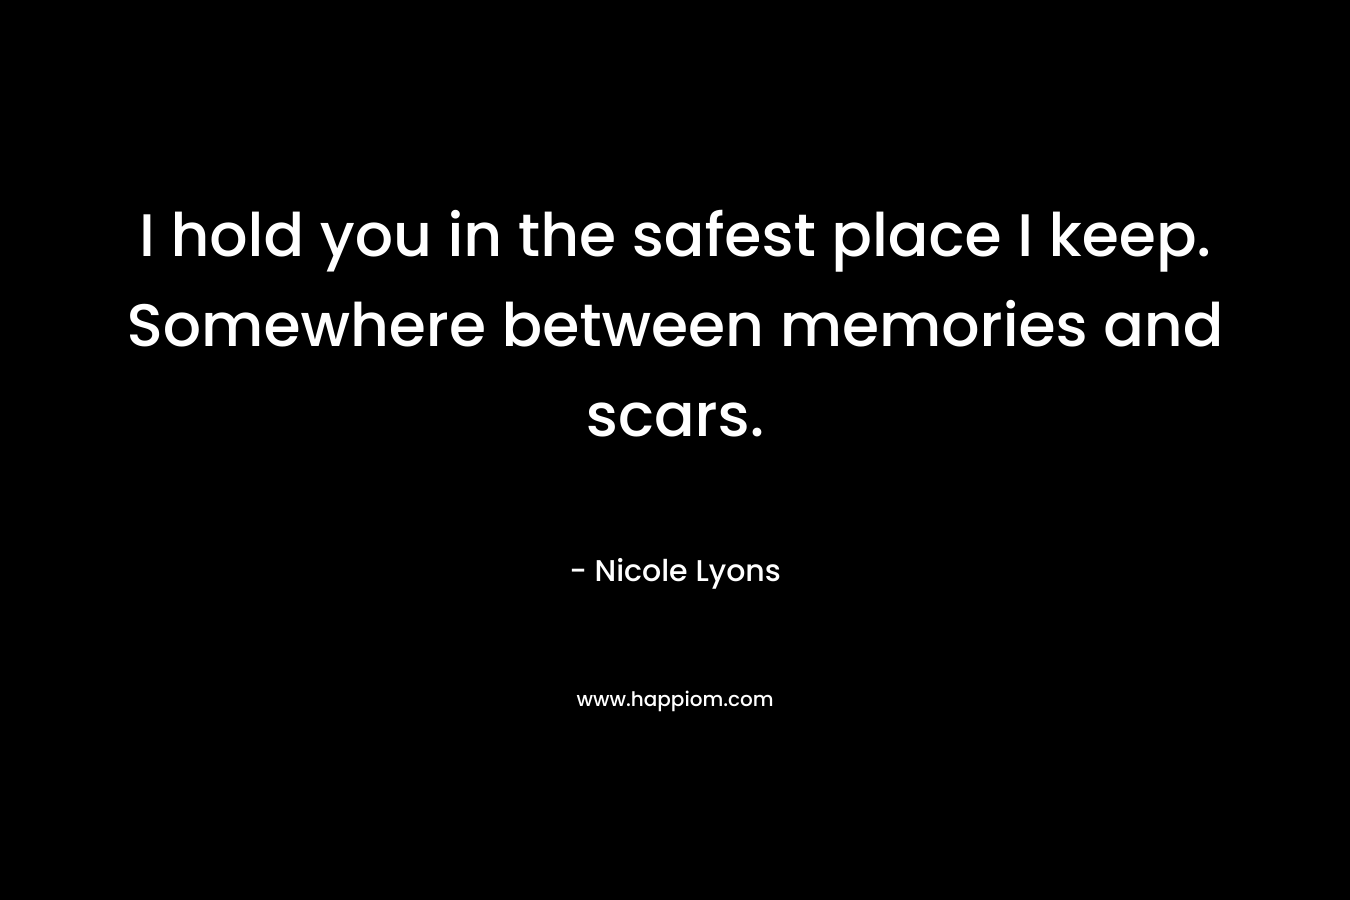 I hold you in the safest place I keep. Somewhere between memories and scars.